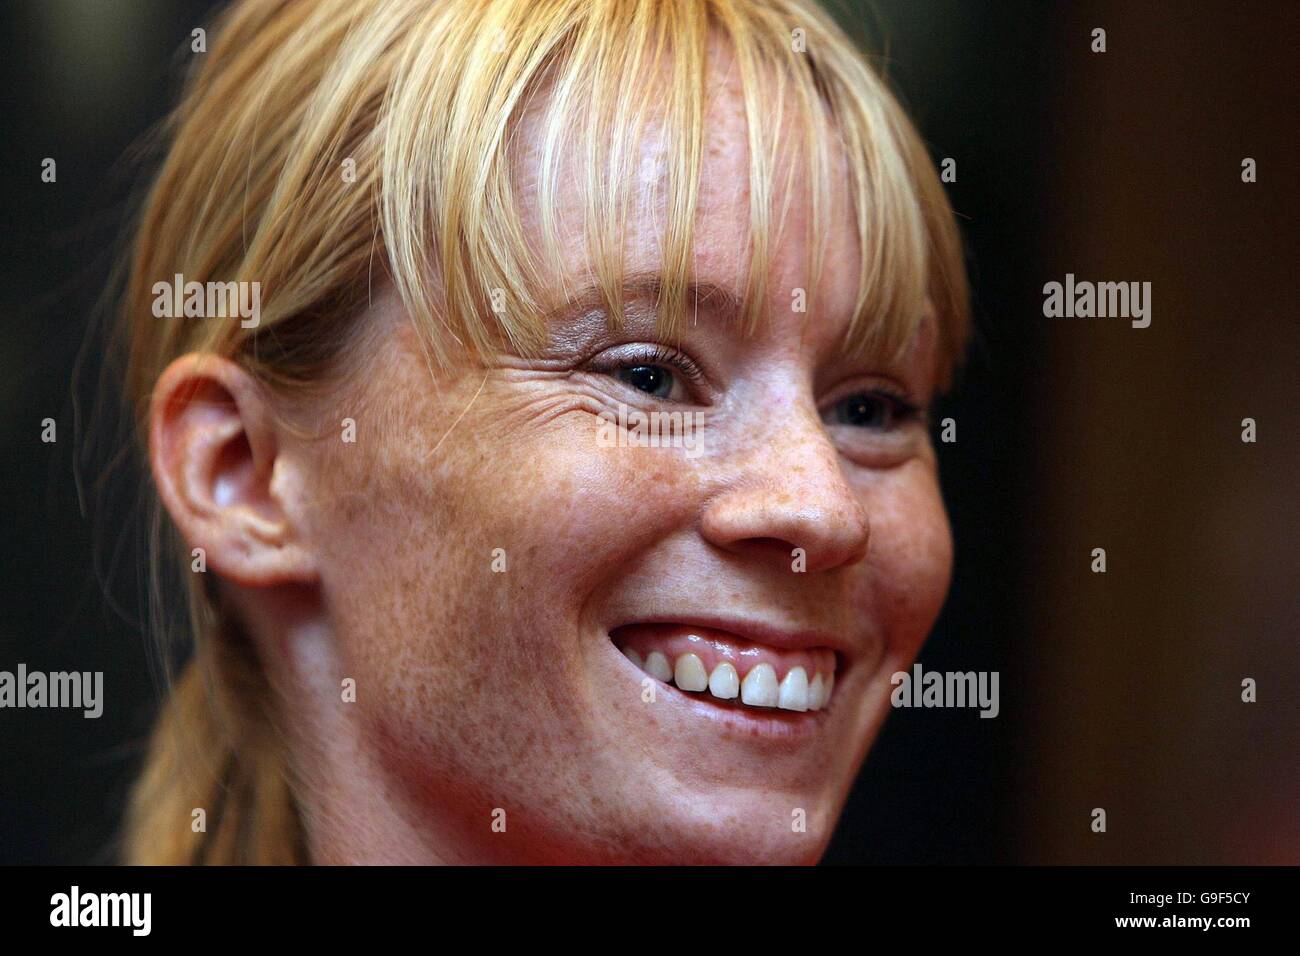 Irish athlete and medal hope Derval O'Rourke talks to the media during a press conference held at the Conrad Hotel, Dublin in advance of the forthcoming Spar European Athletics Championships in Gothenburg next week. Stock Photo